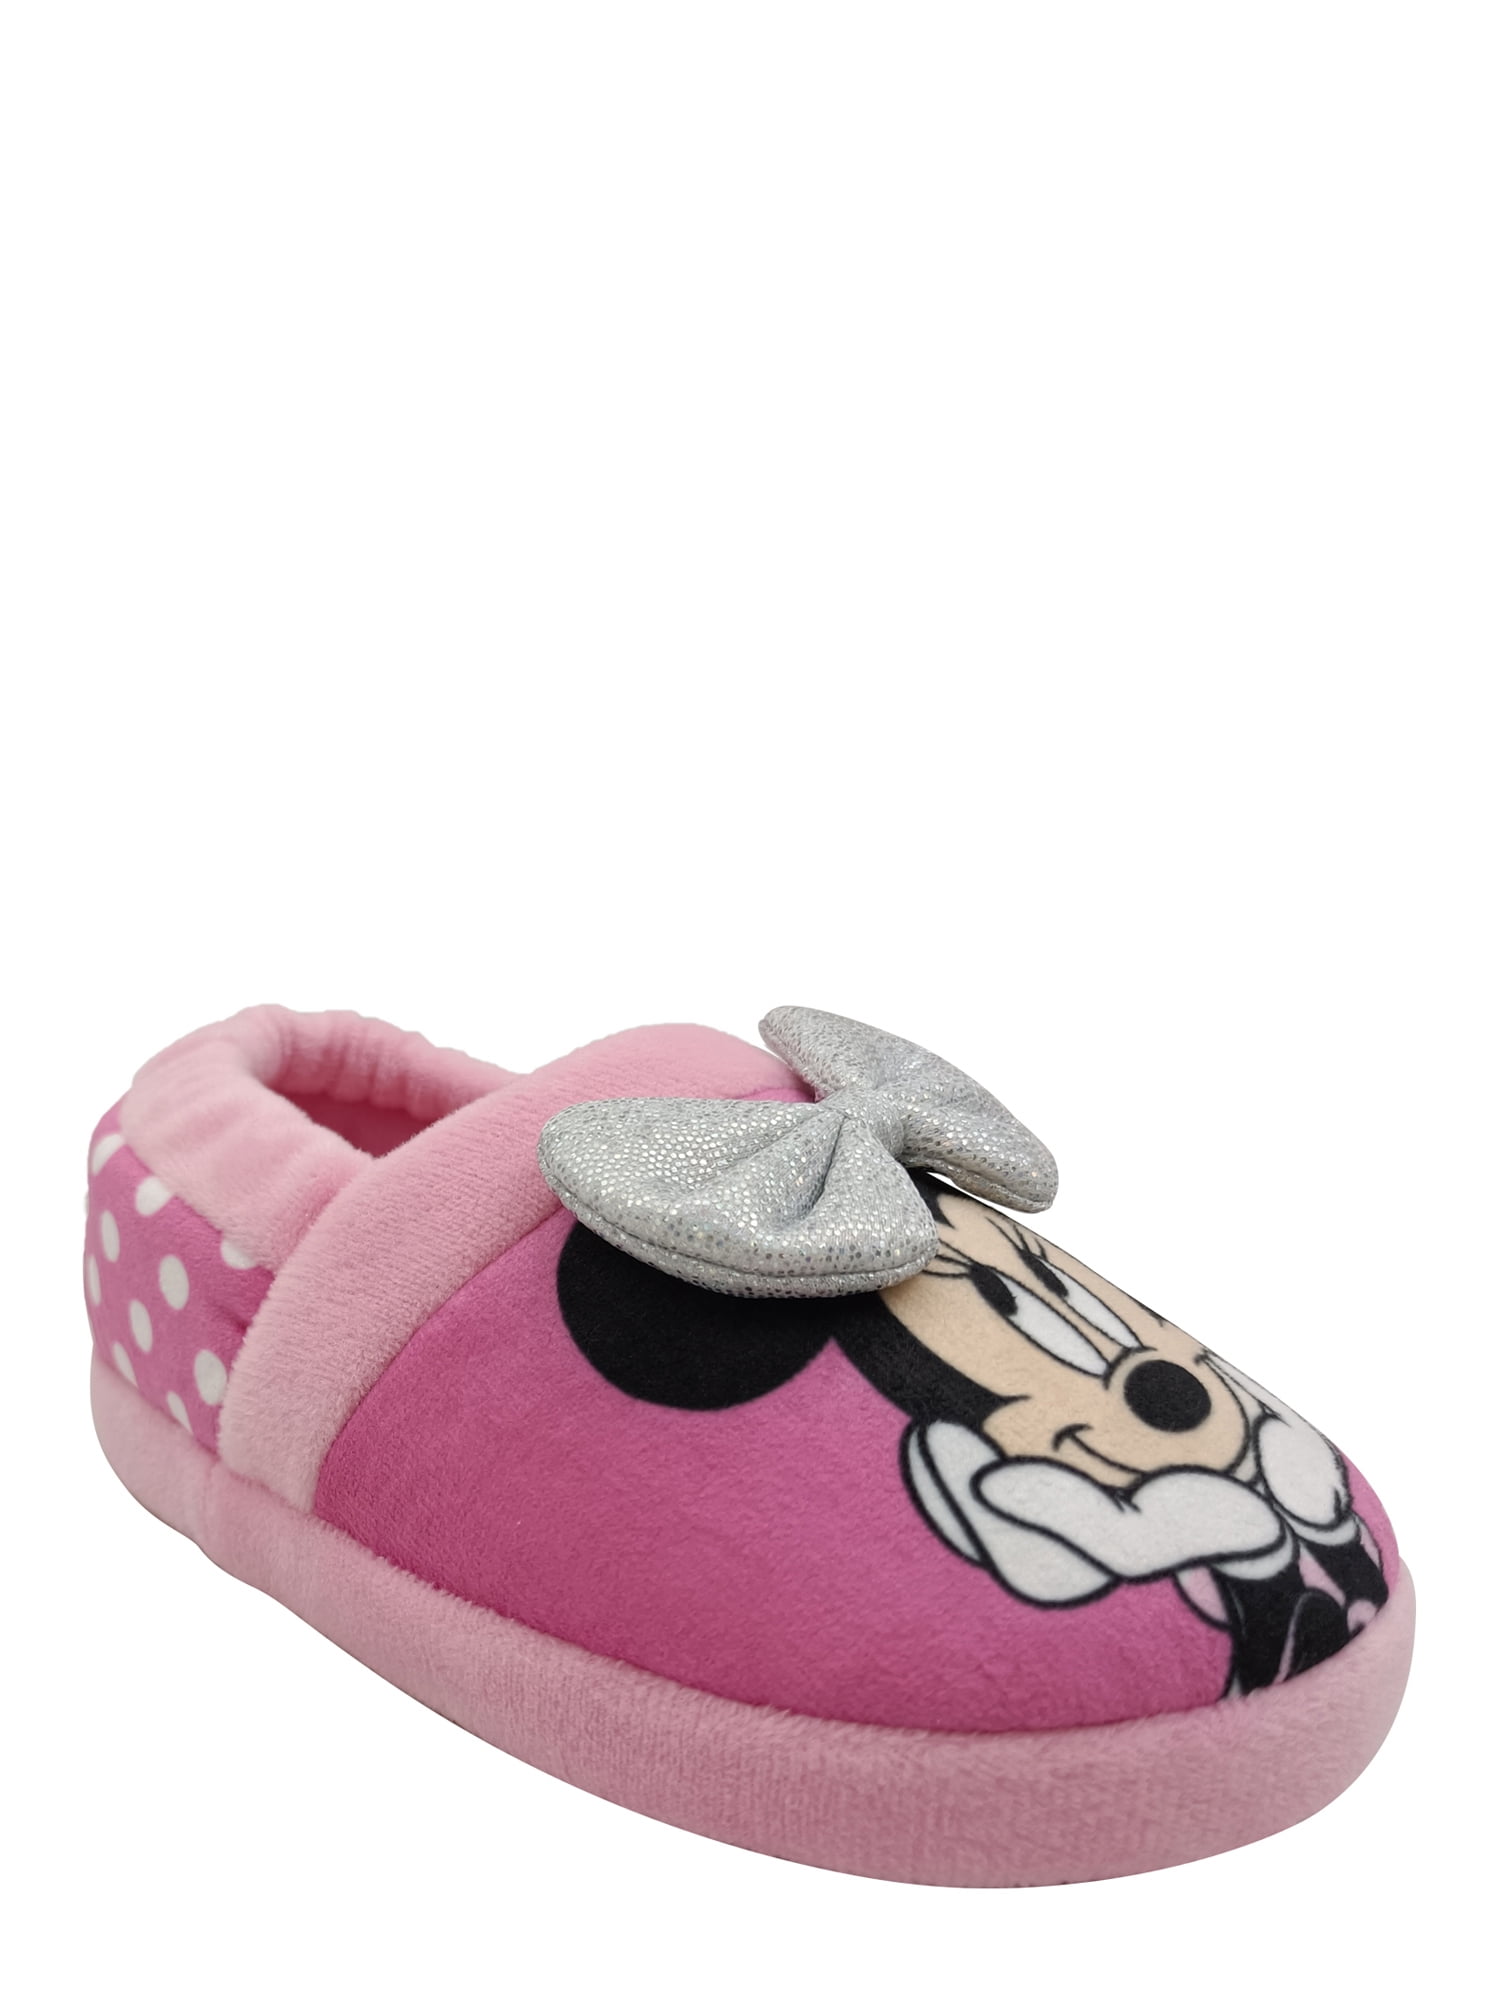 Girls Minnie Mouse Pink Slippers R19B 